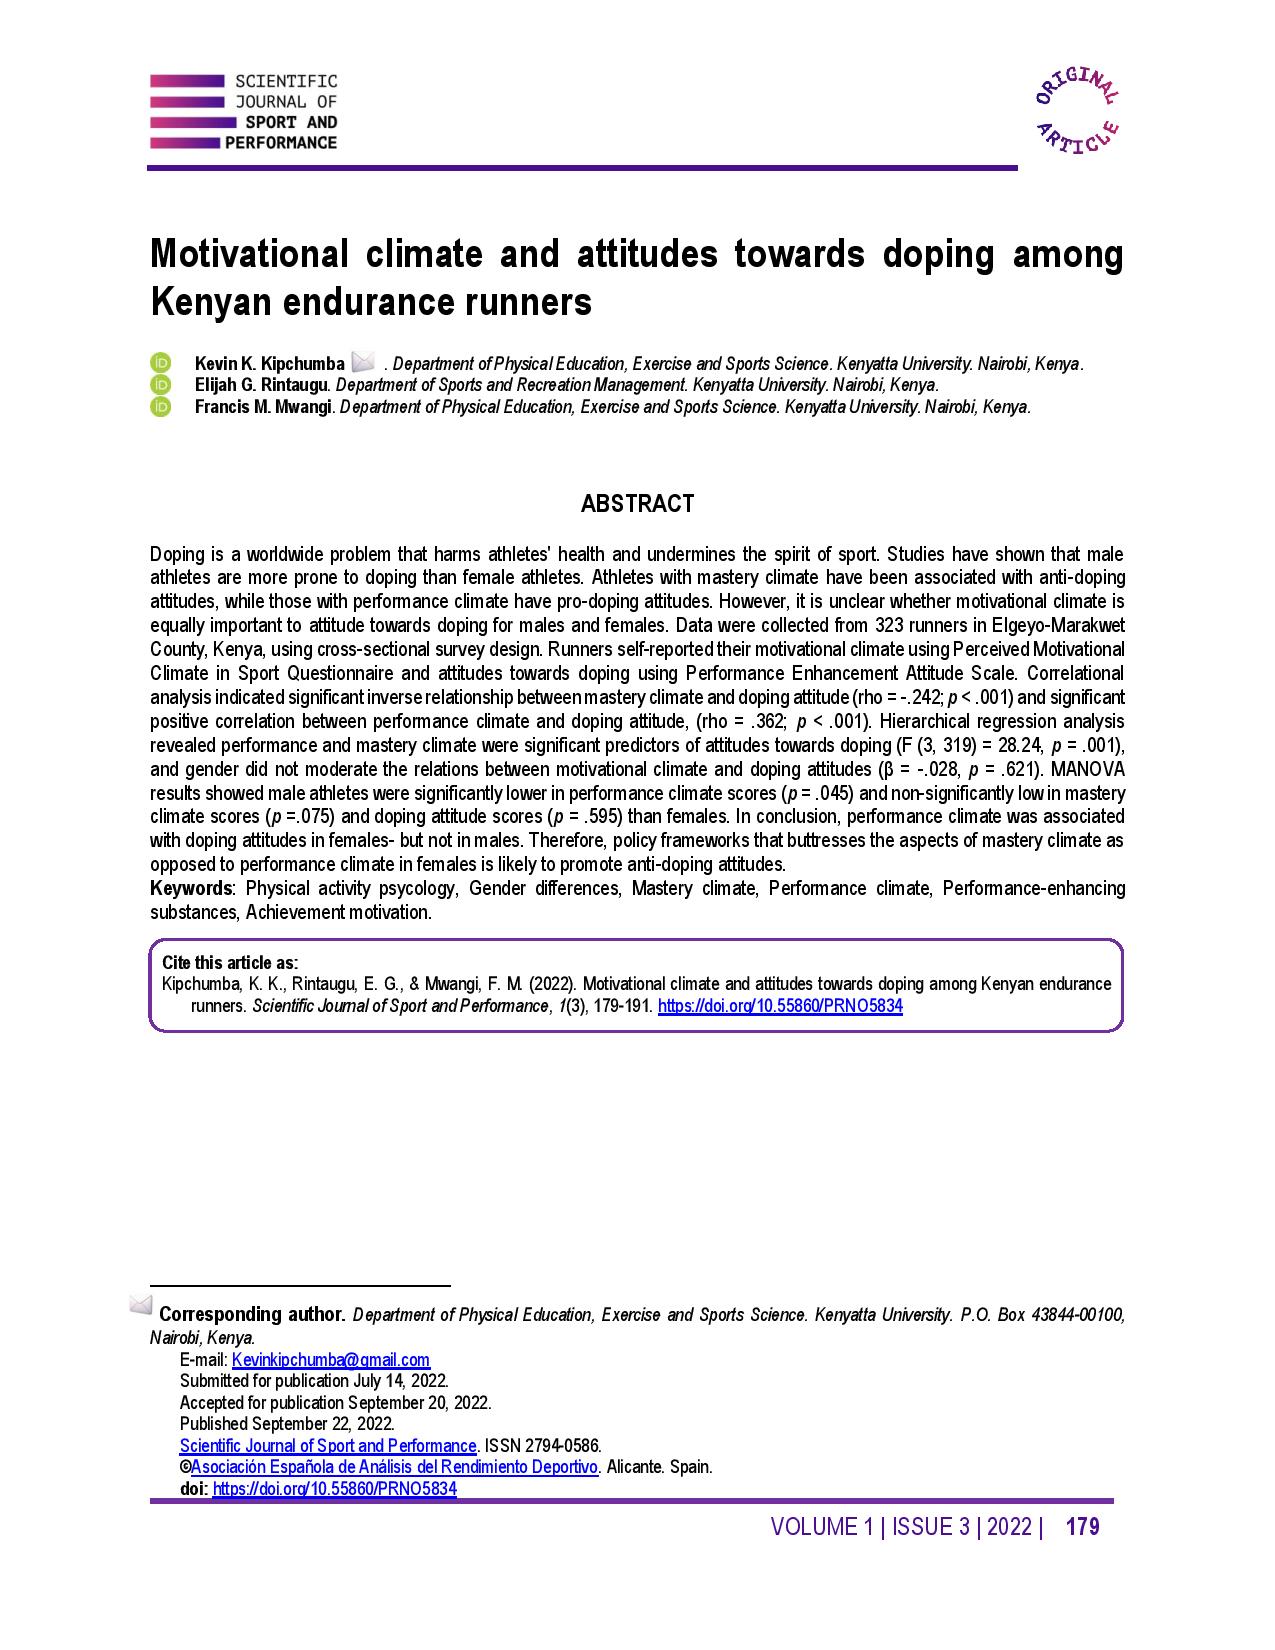 Motivational Climate And Attitudes Towards Doping Among Kenyan Endurance Runners Scientific Journal Of Sport And Performance